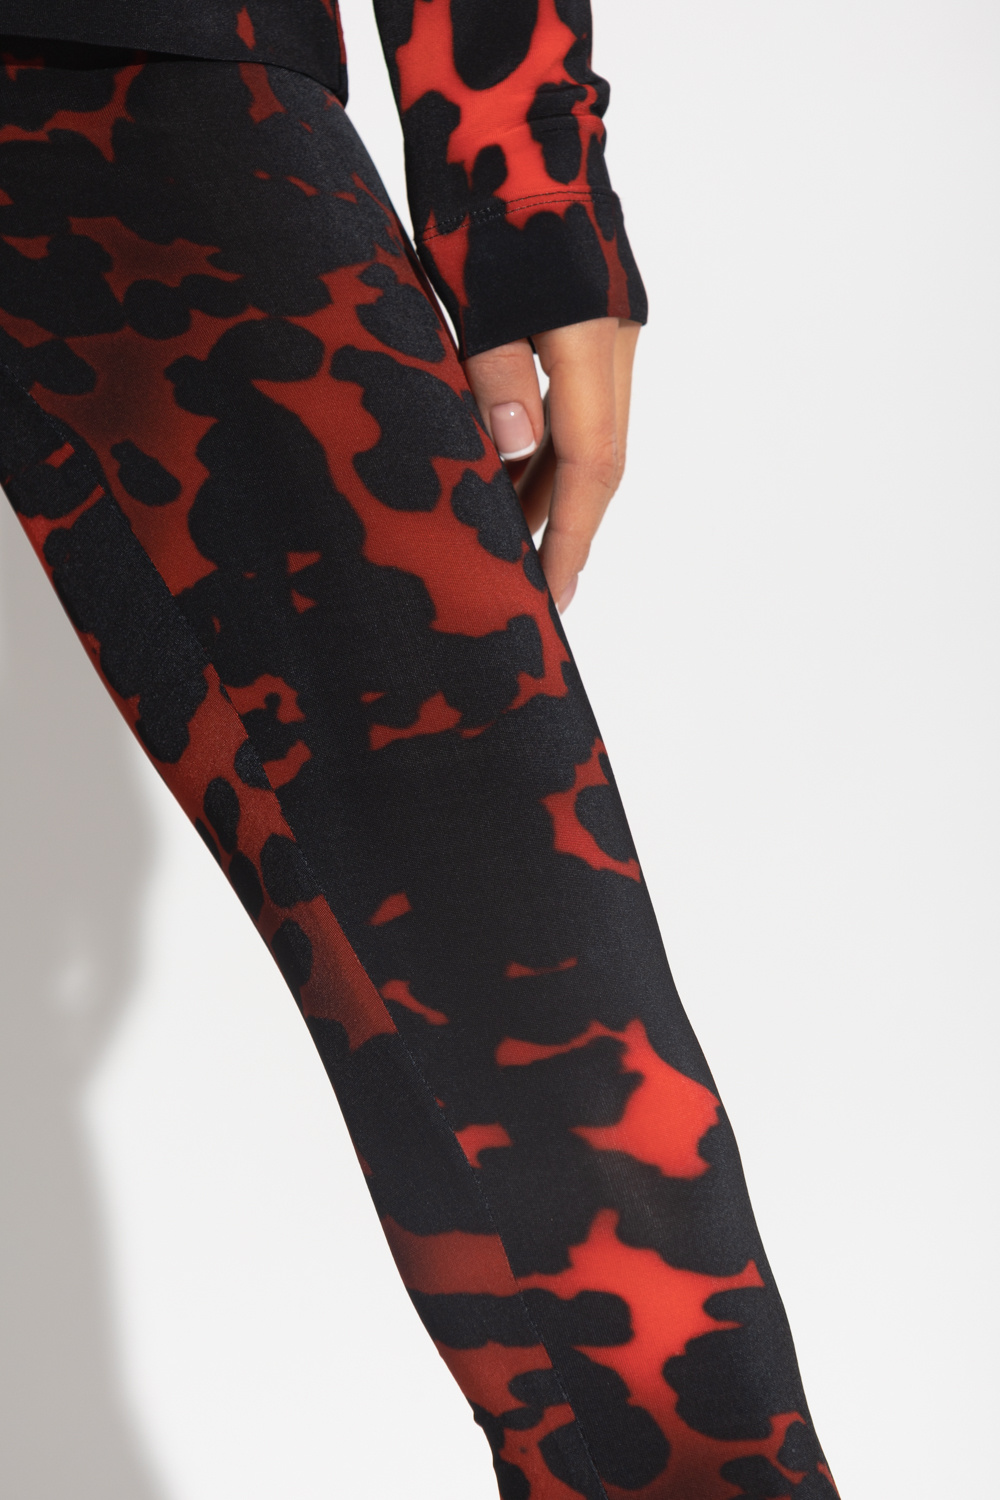 IetpShops Germany - Red Leggings with elastic waistband Dries Van Noten -  asymmetrical fitted slip dress